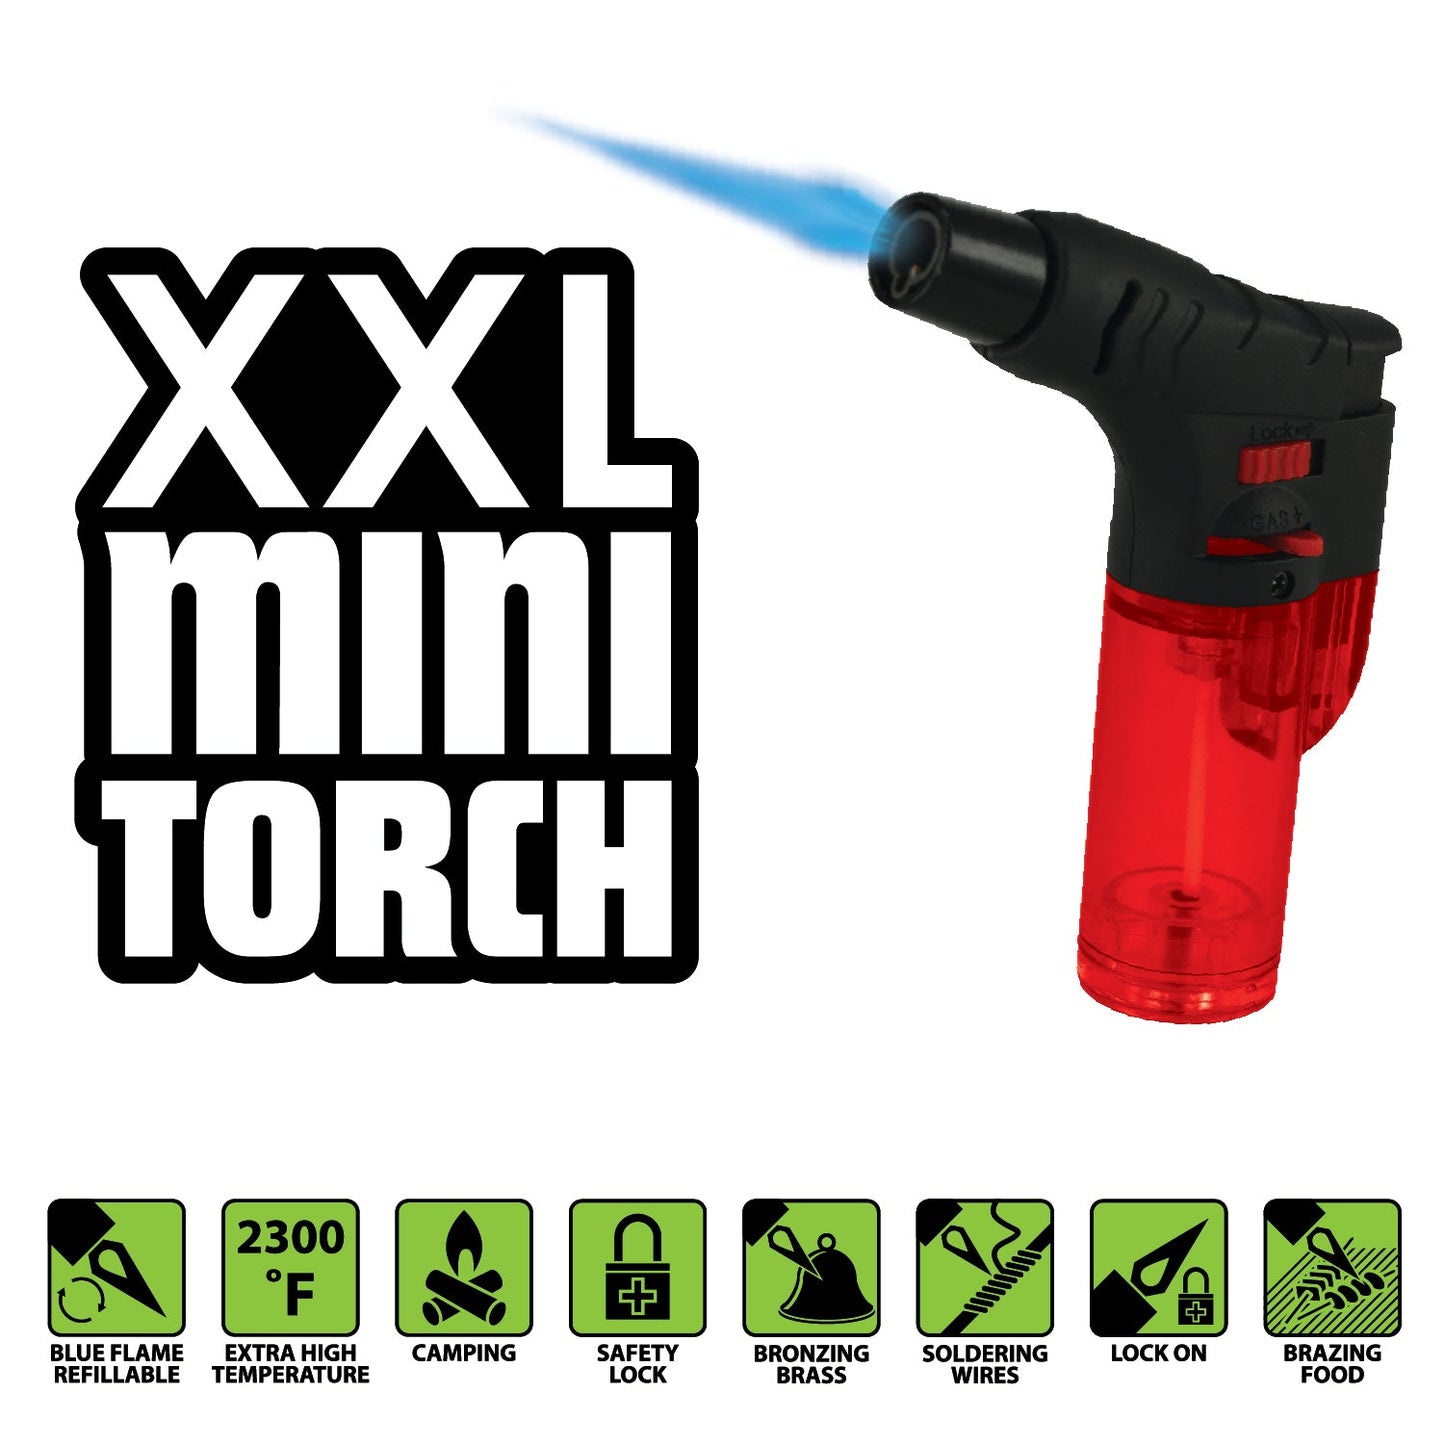 ITEM NUMBER 040300 THIN TUBE XXL TORCH D 9 PIECES PER DISPLAY